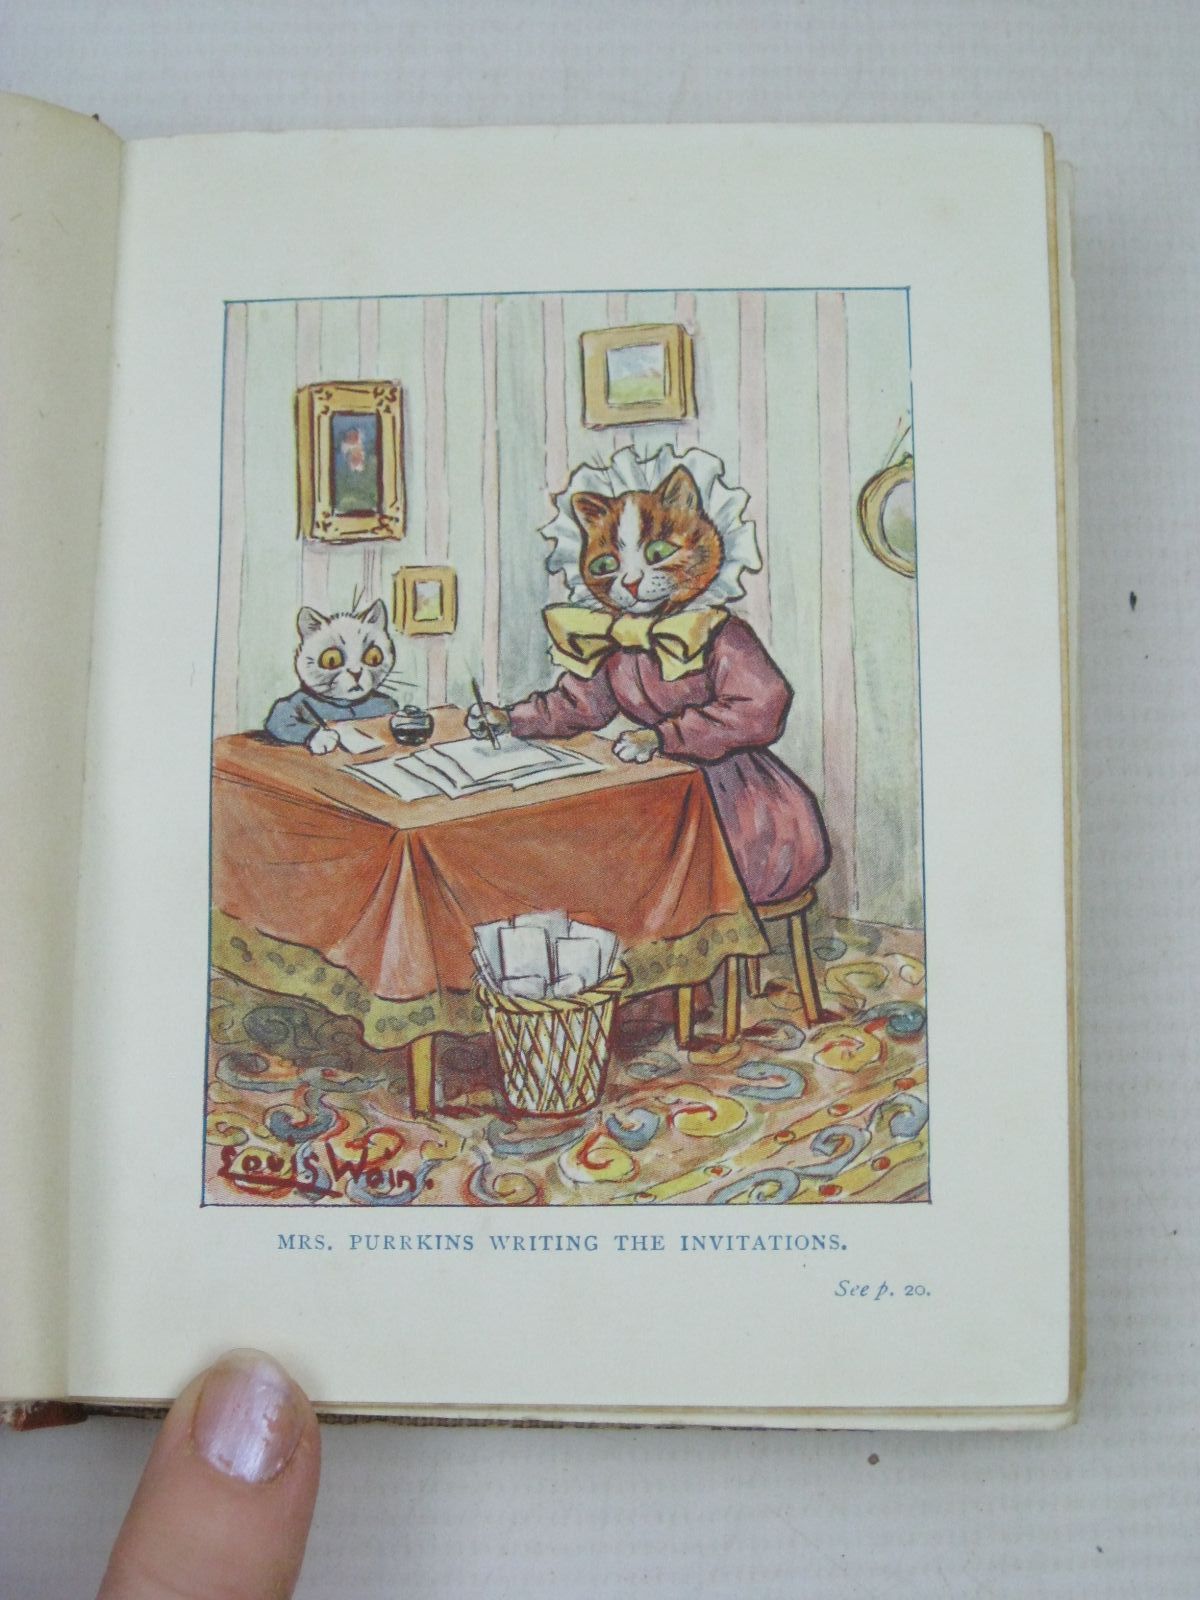 Photo of THE ADVENTURES OF FRISKERS AND HIS FRIENDS written by Hurrell, Marian Isabel illustrated by Wain, Louis published by Robert Culley (STOCK CODE: 1405778)  for sale by Stella & Rose's Books